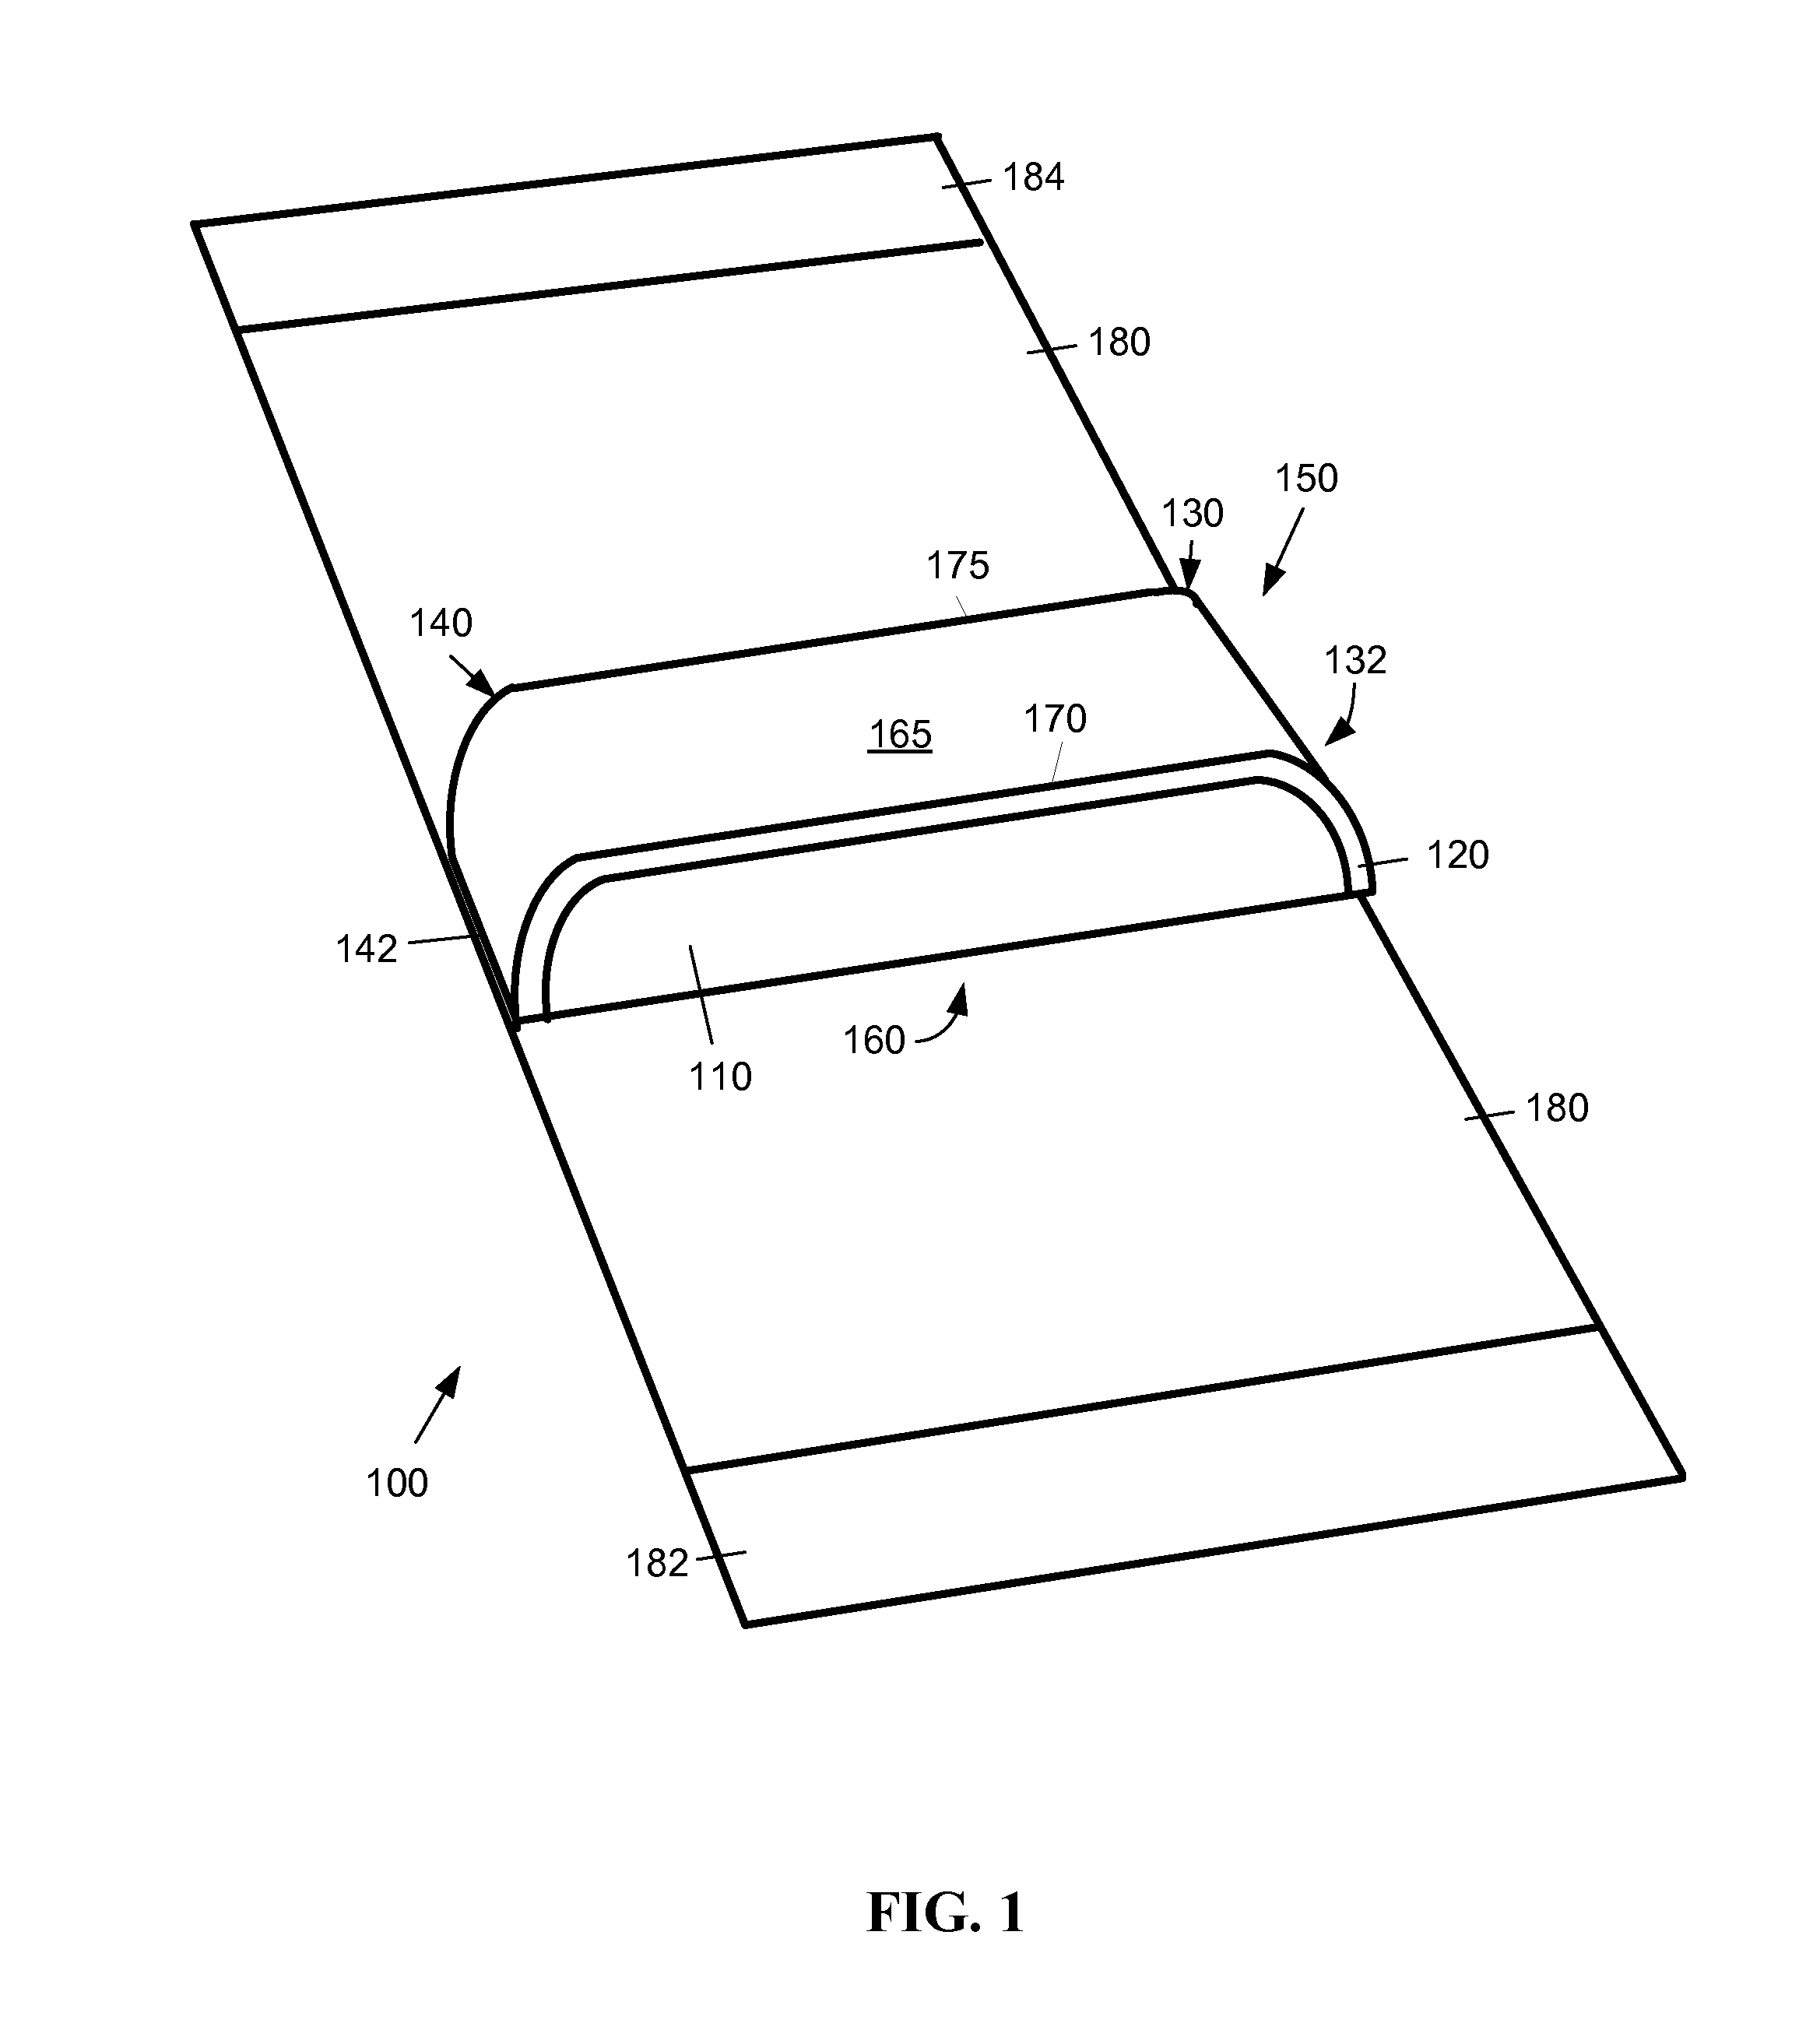 Apparatus for plantar fasciitis treatment and method for making same